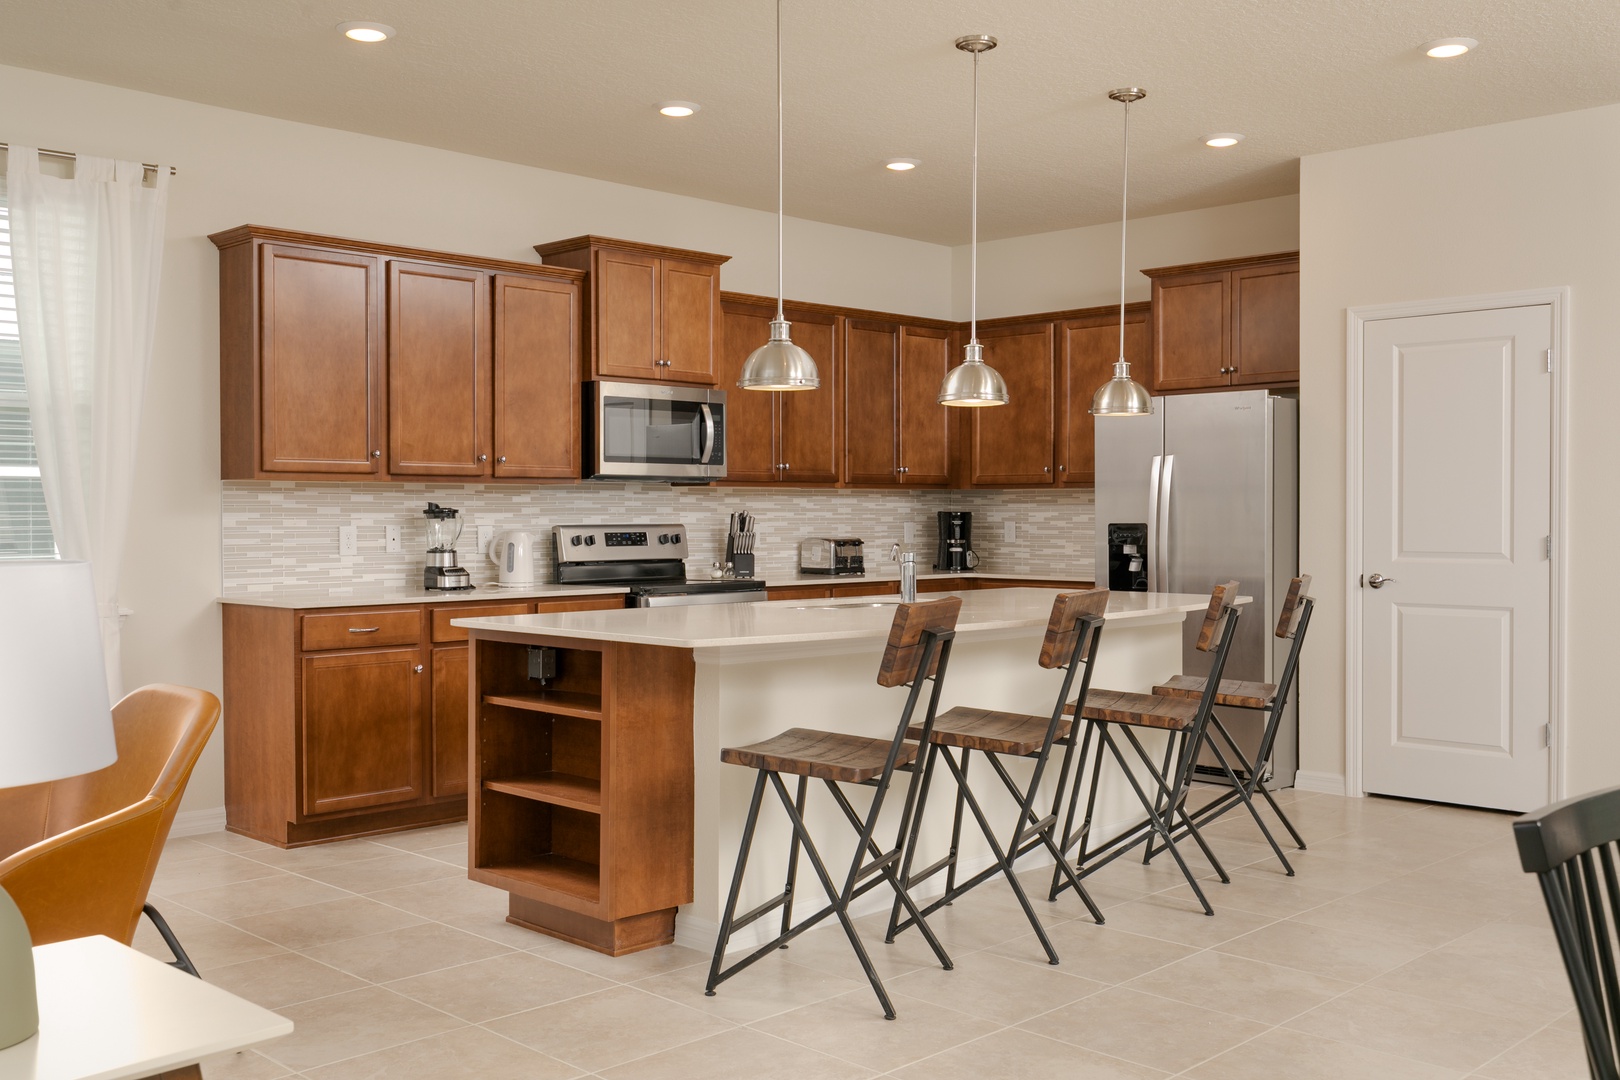 The gorgeous kitchen is fully equipped with all the comforts of home